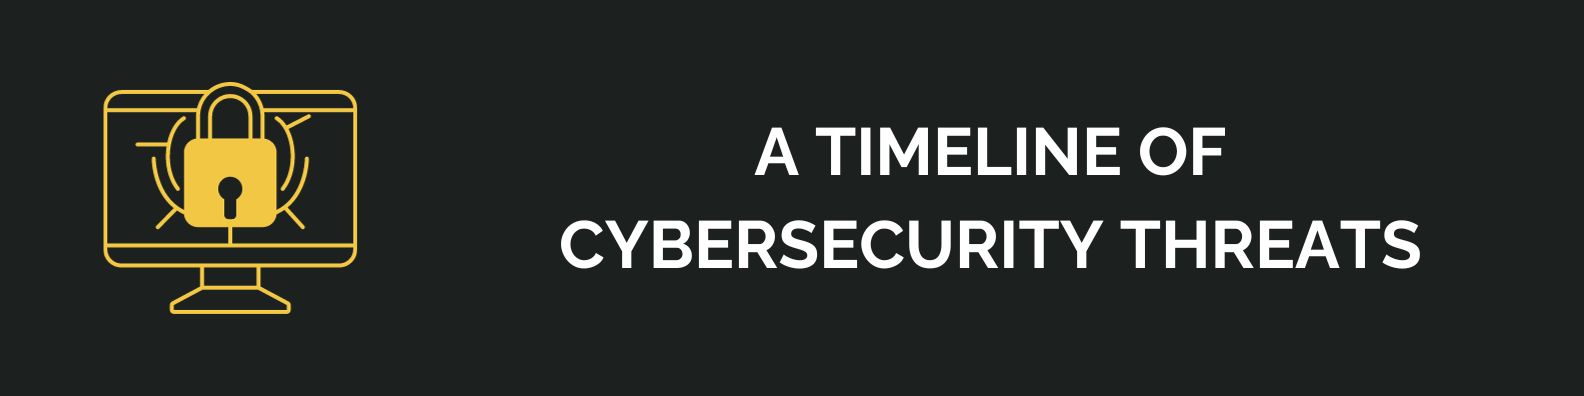 A Timeline of Cybersecurity Threats